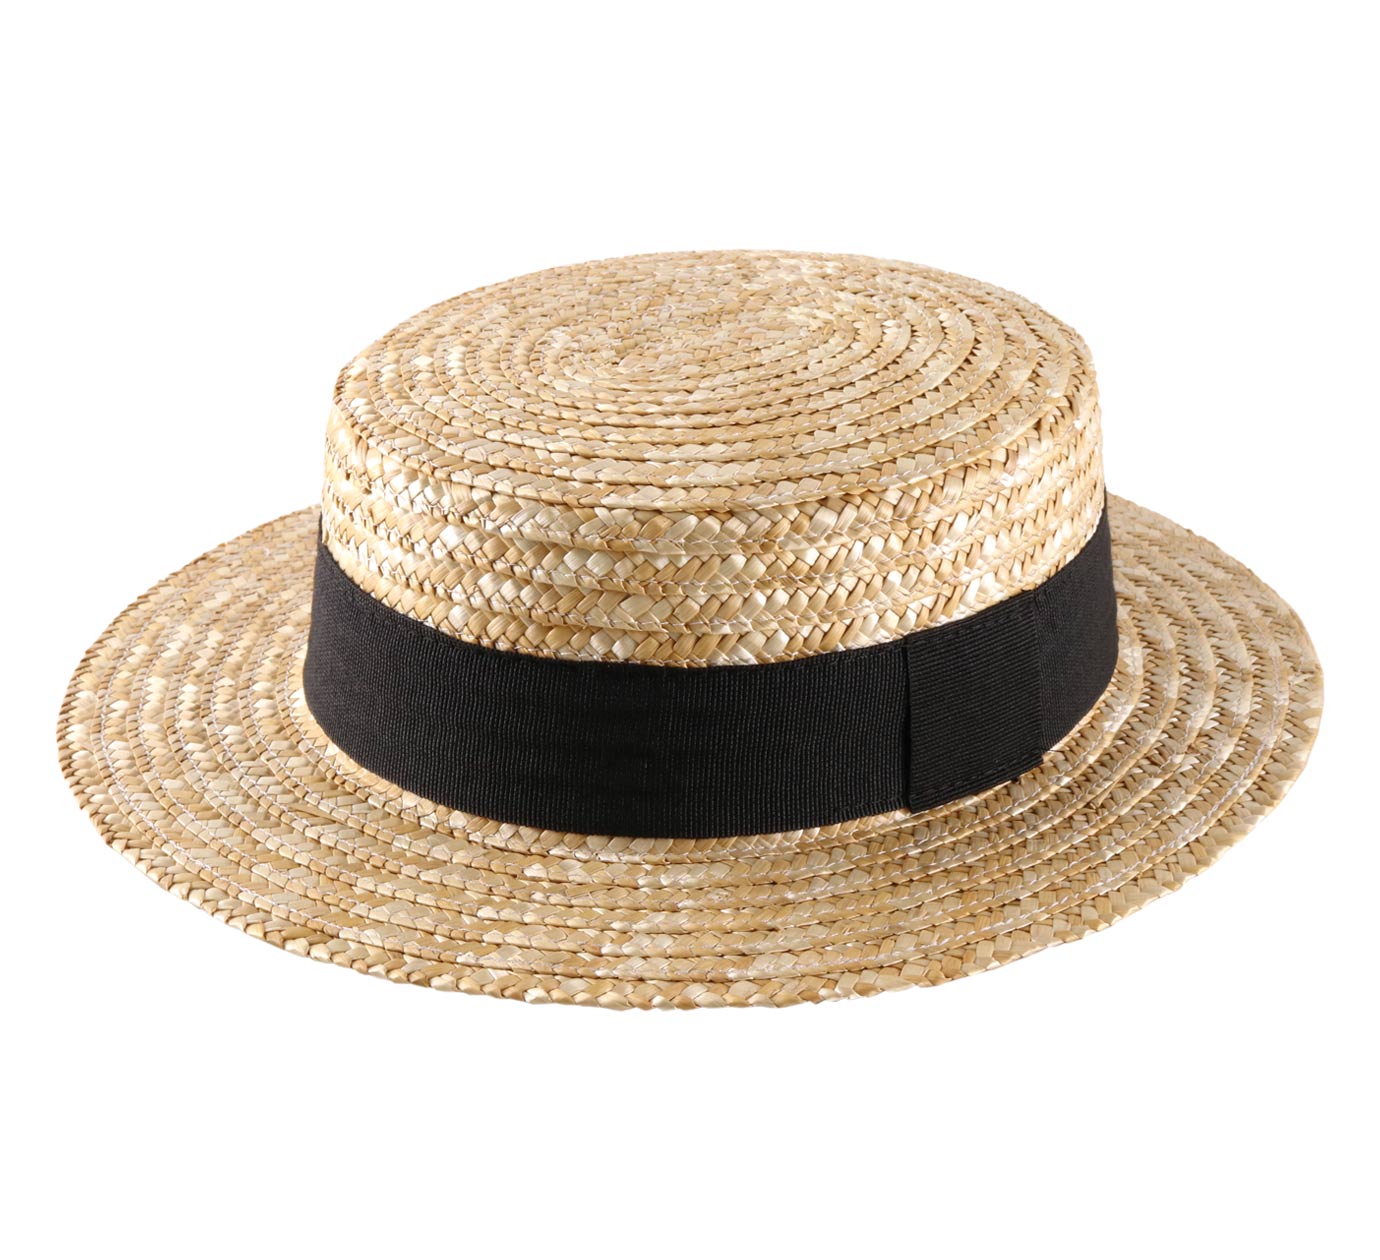 Classic Italy - Boater Hat Boater Beige